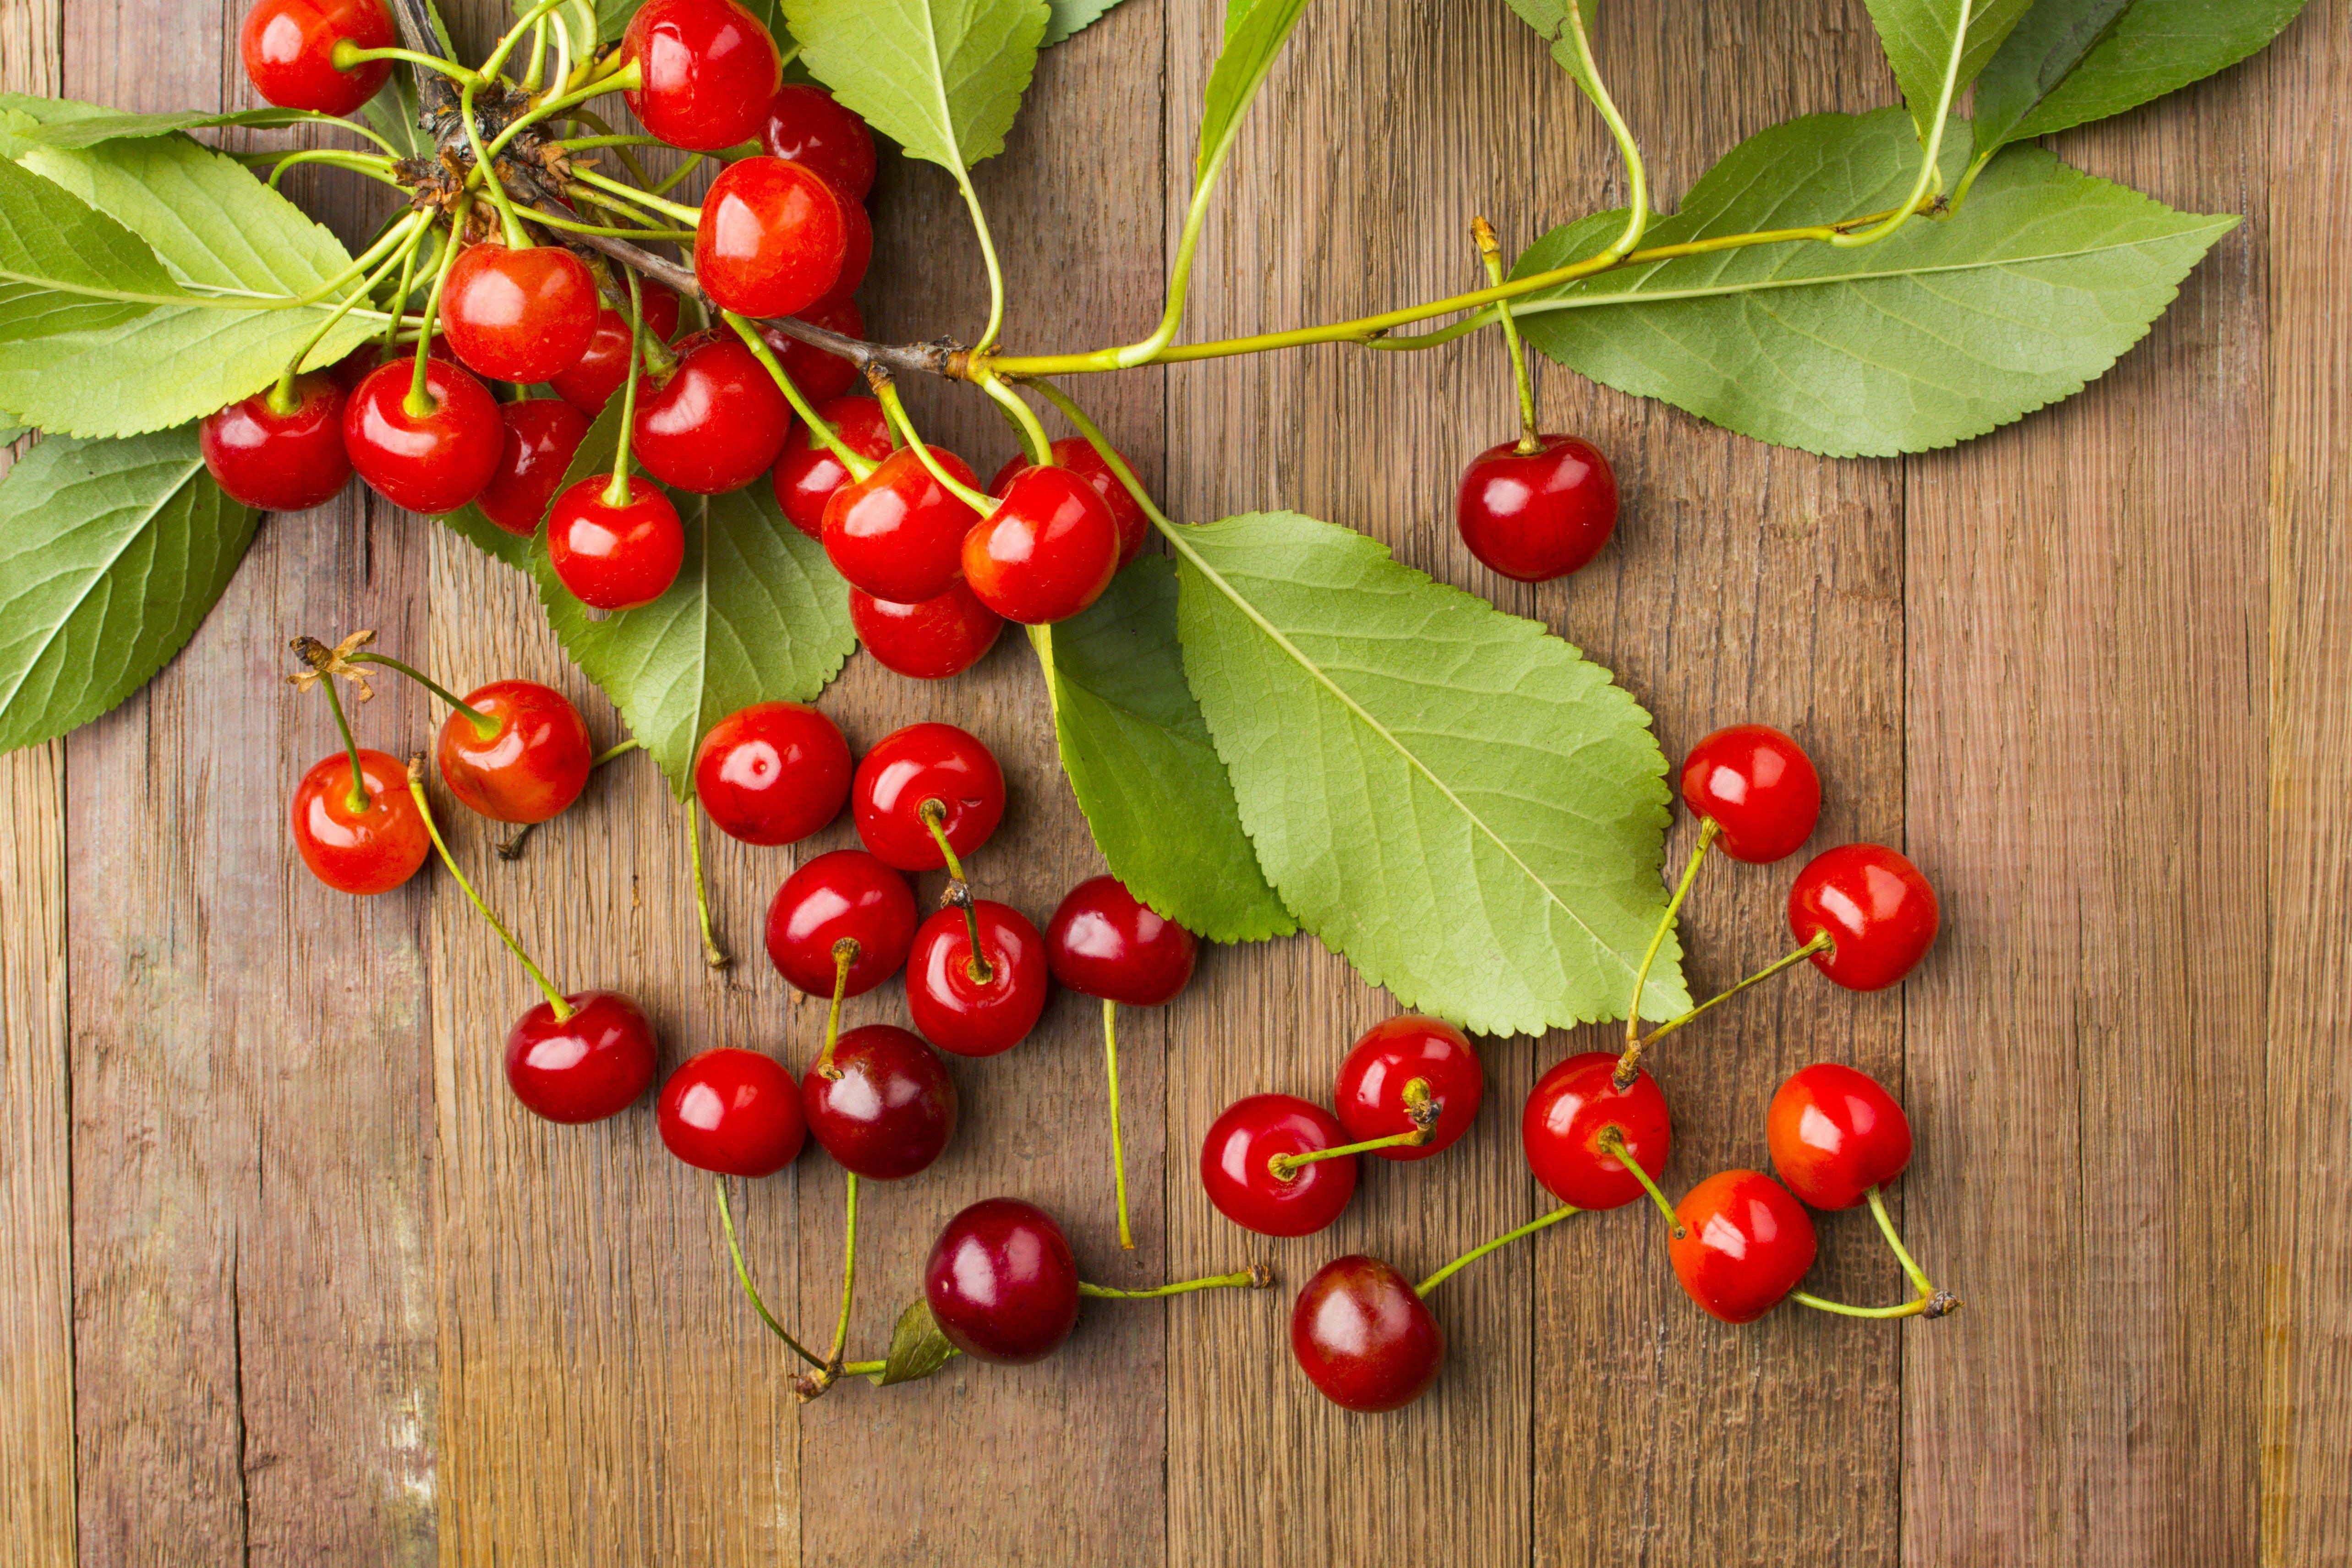 Tart cherry juice for muscle recovery